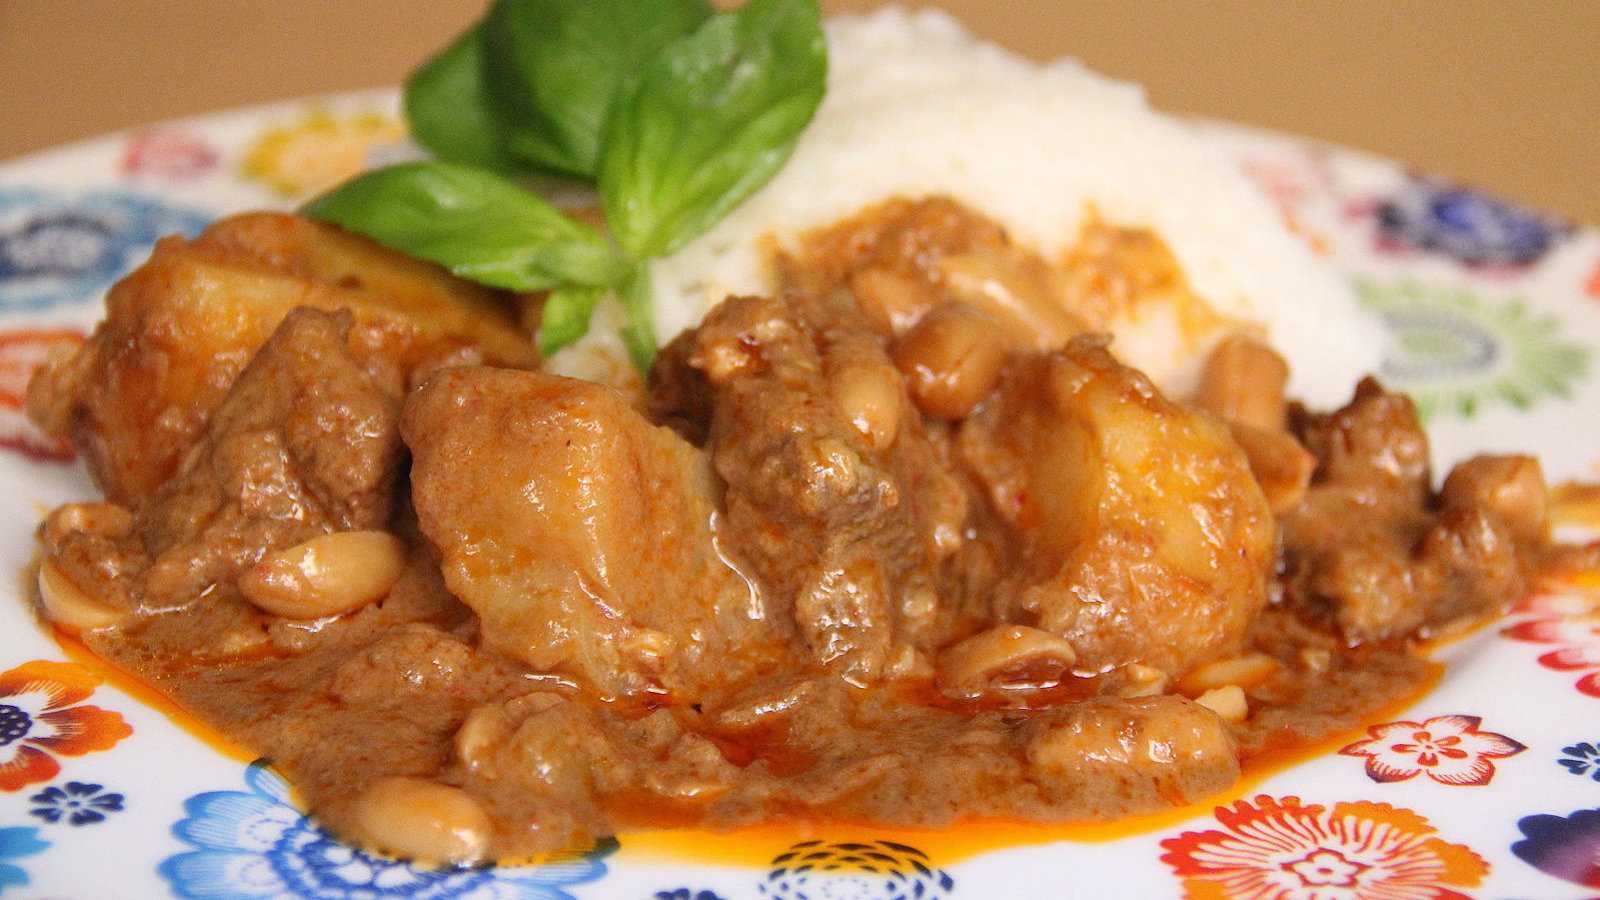 Massaman curry is a delicious Thai dish influenced by Indian and Muslim immigrants